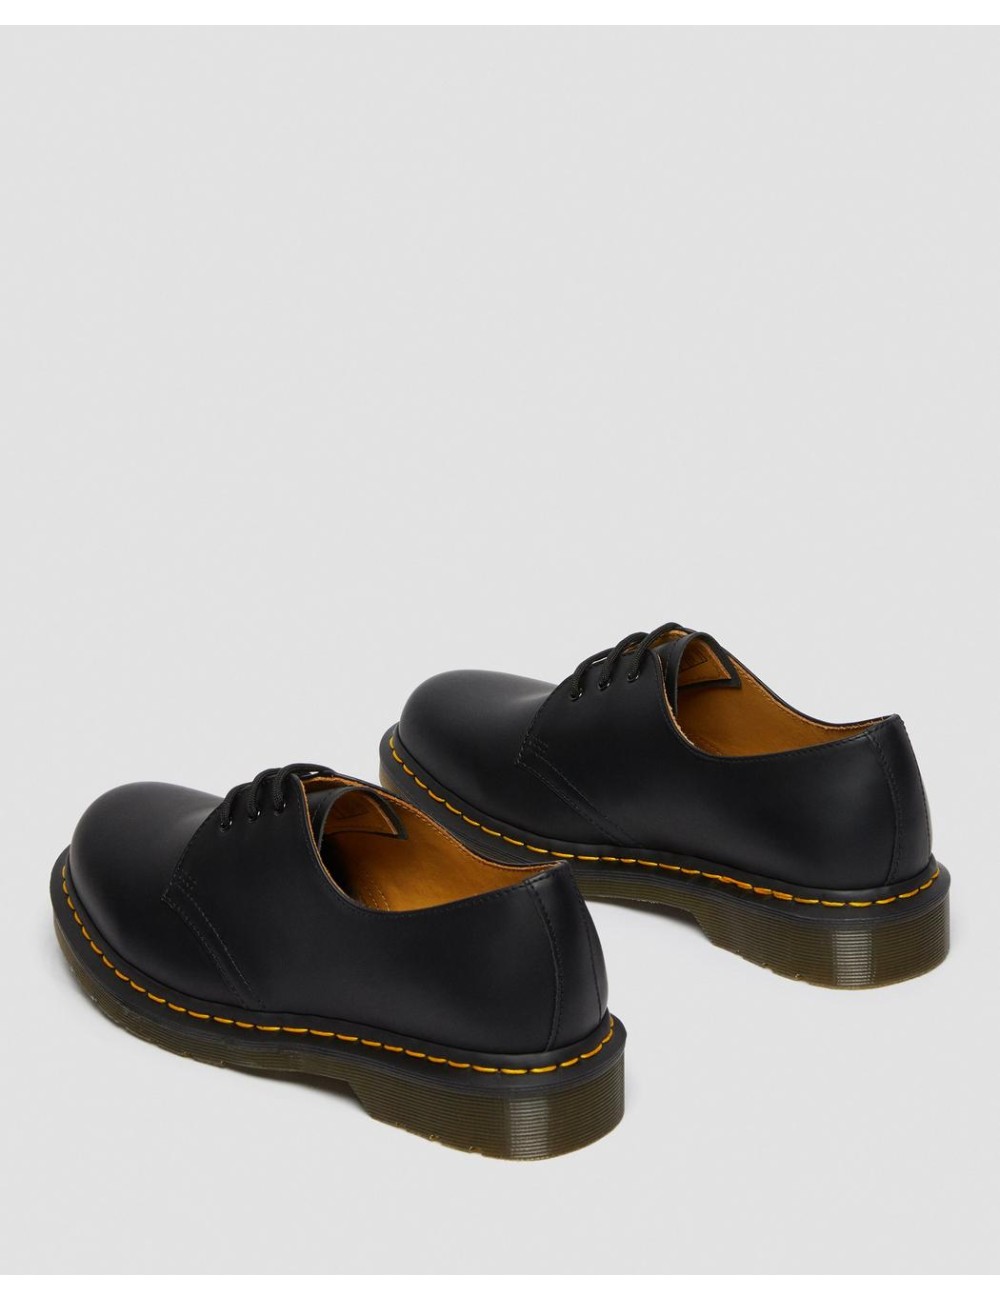 DR MARTENS 1461 SMOOTH LEATHER OXFORD SHOES